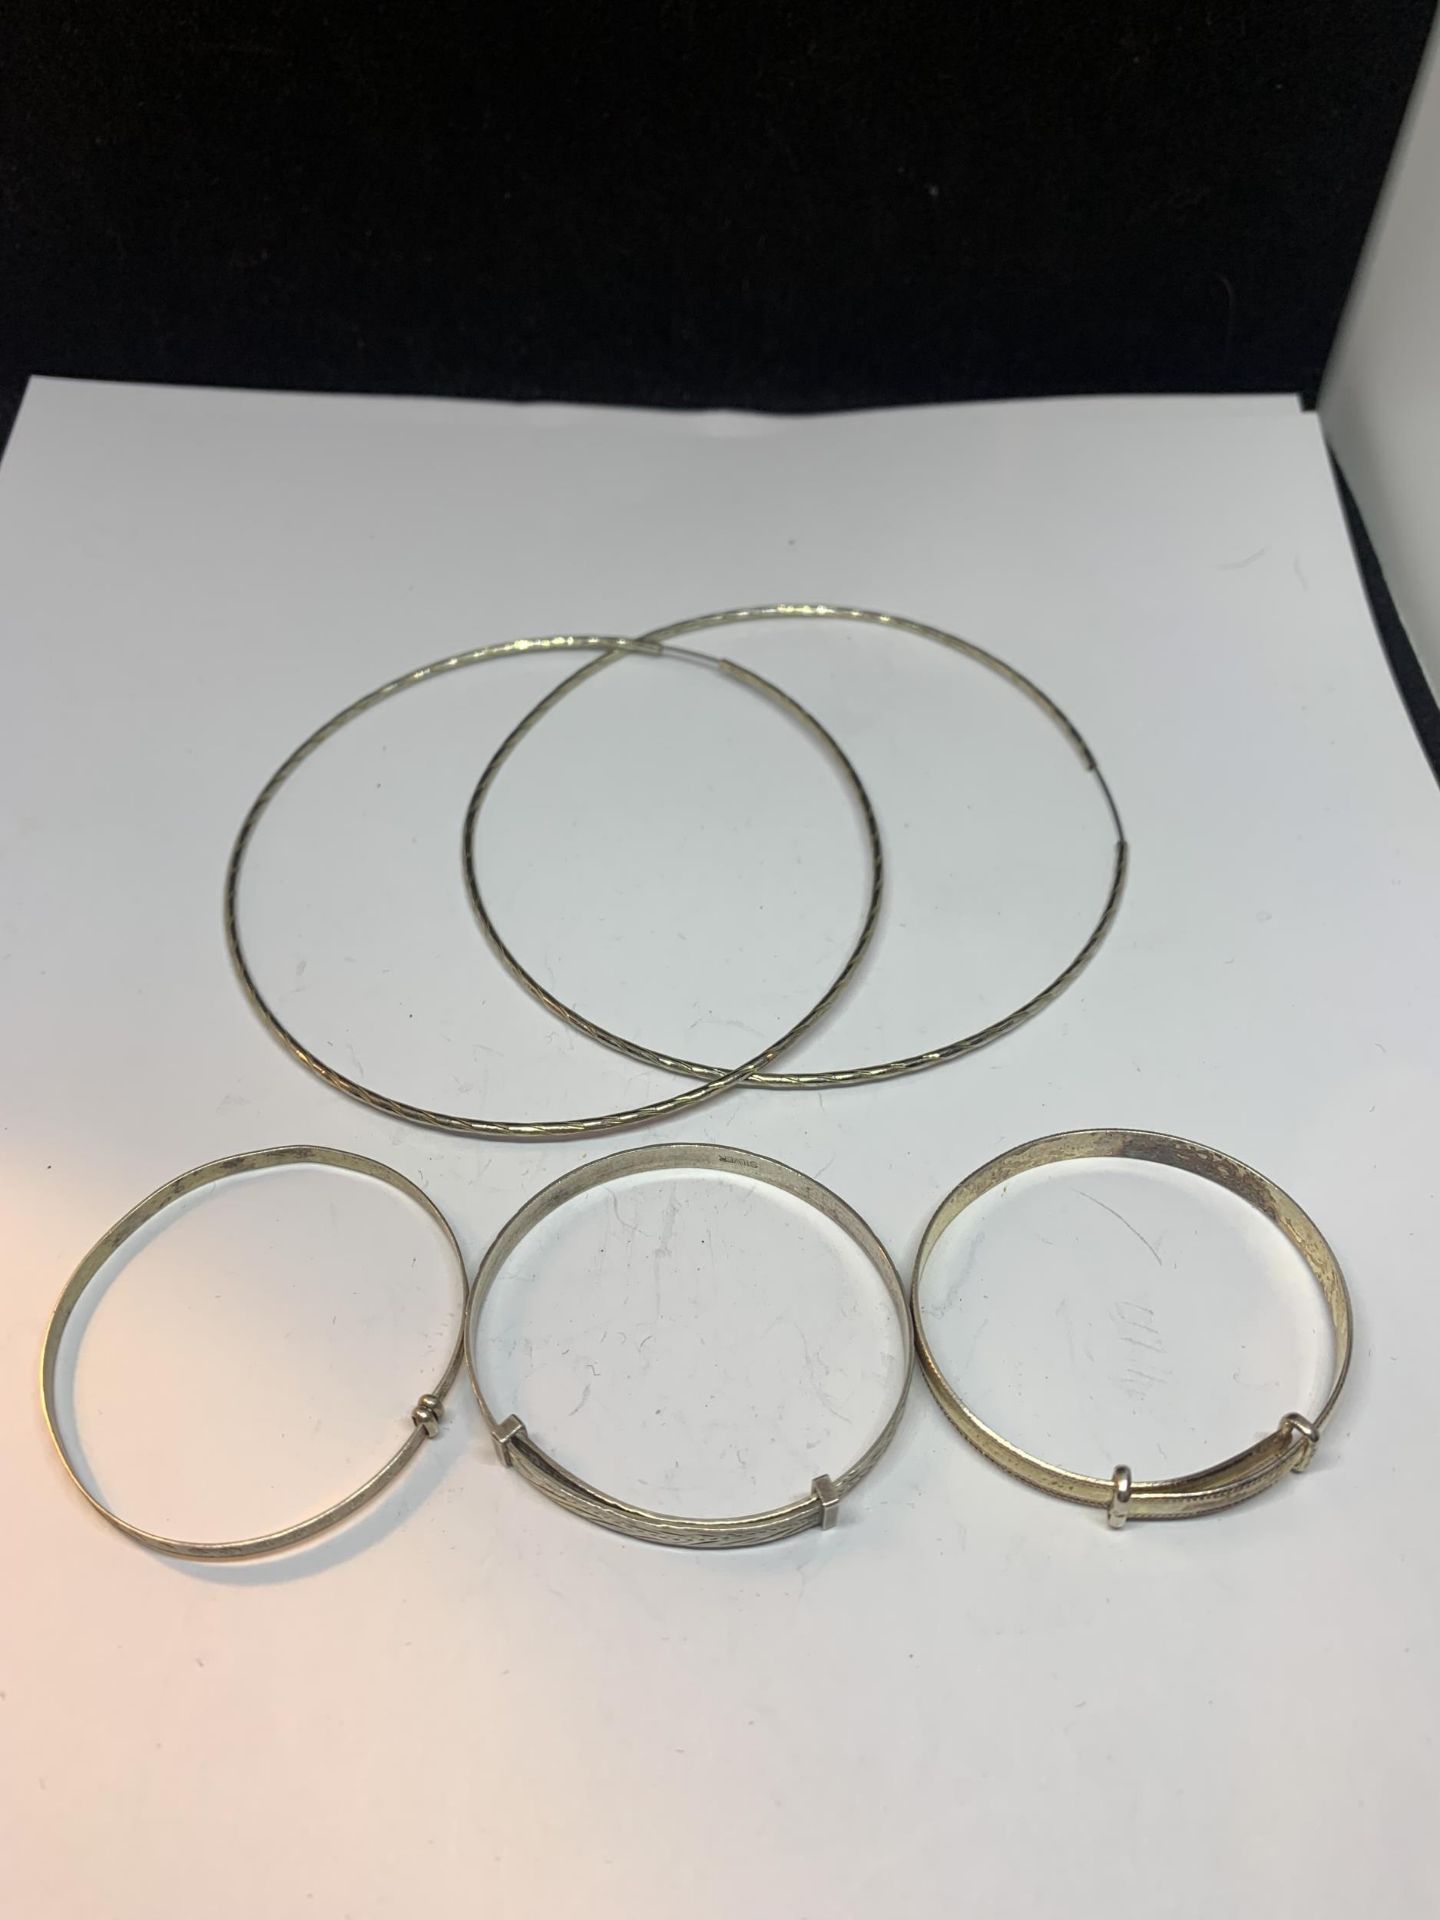 THREE SILVER CHILDRENS BANGLES AND A PAIR OF LARGE EARRINGS